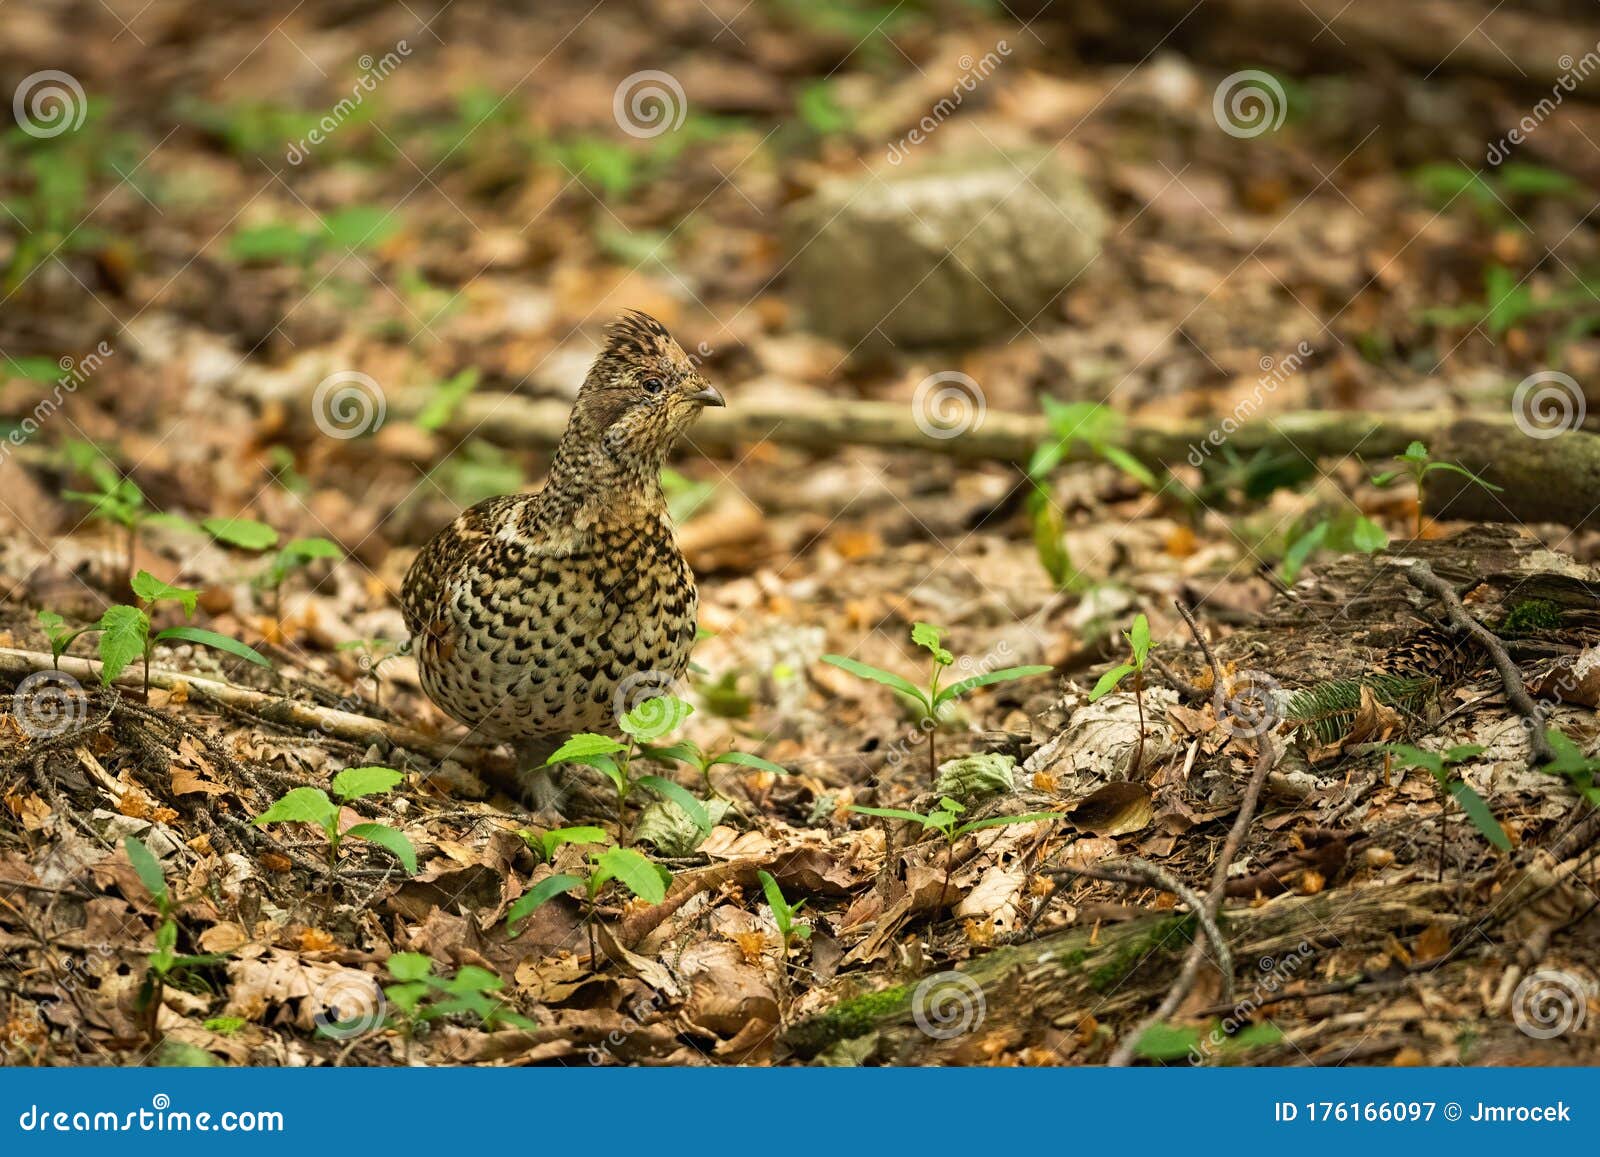 inconspicuous hazel grouse standing on dry leafs in forest